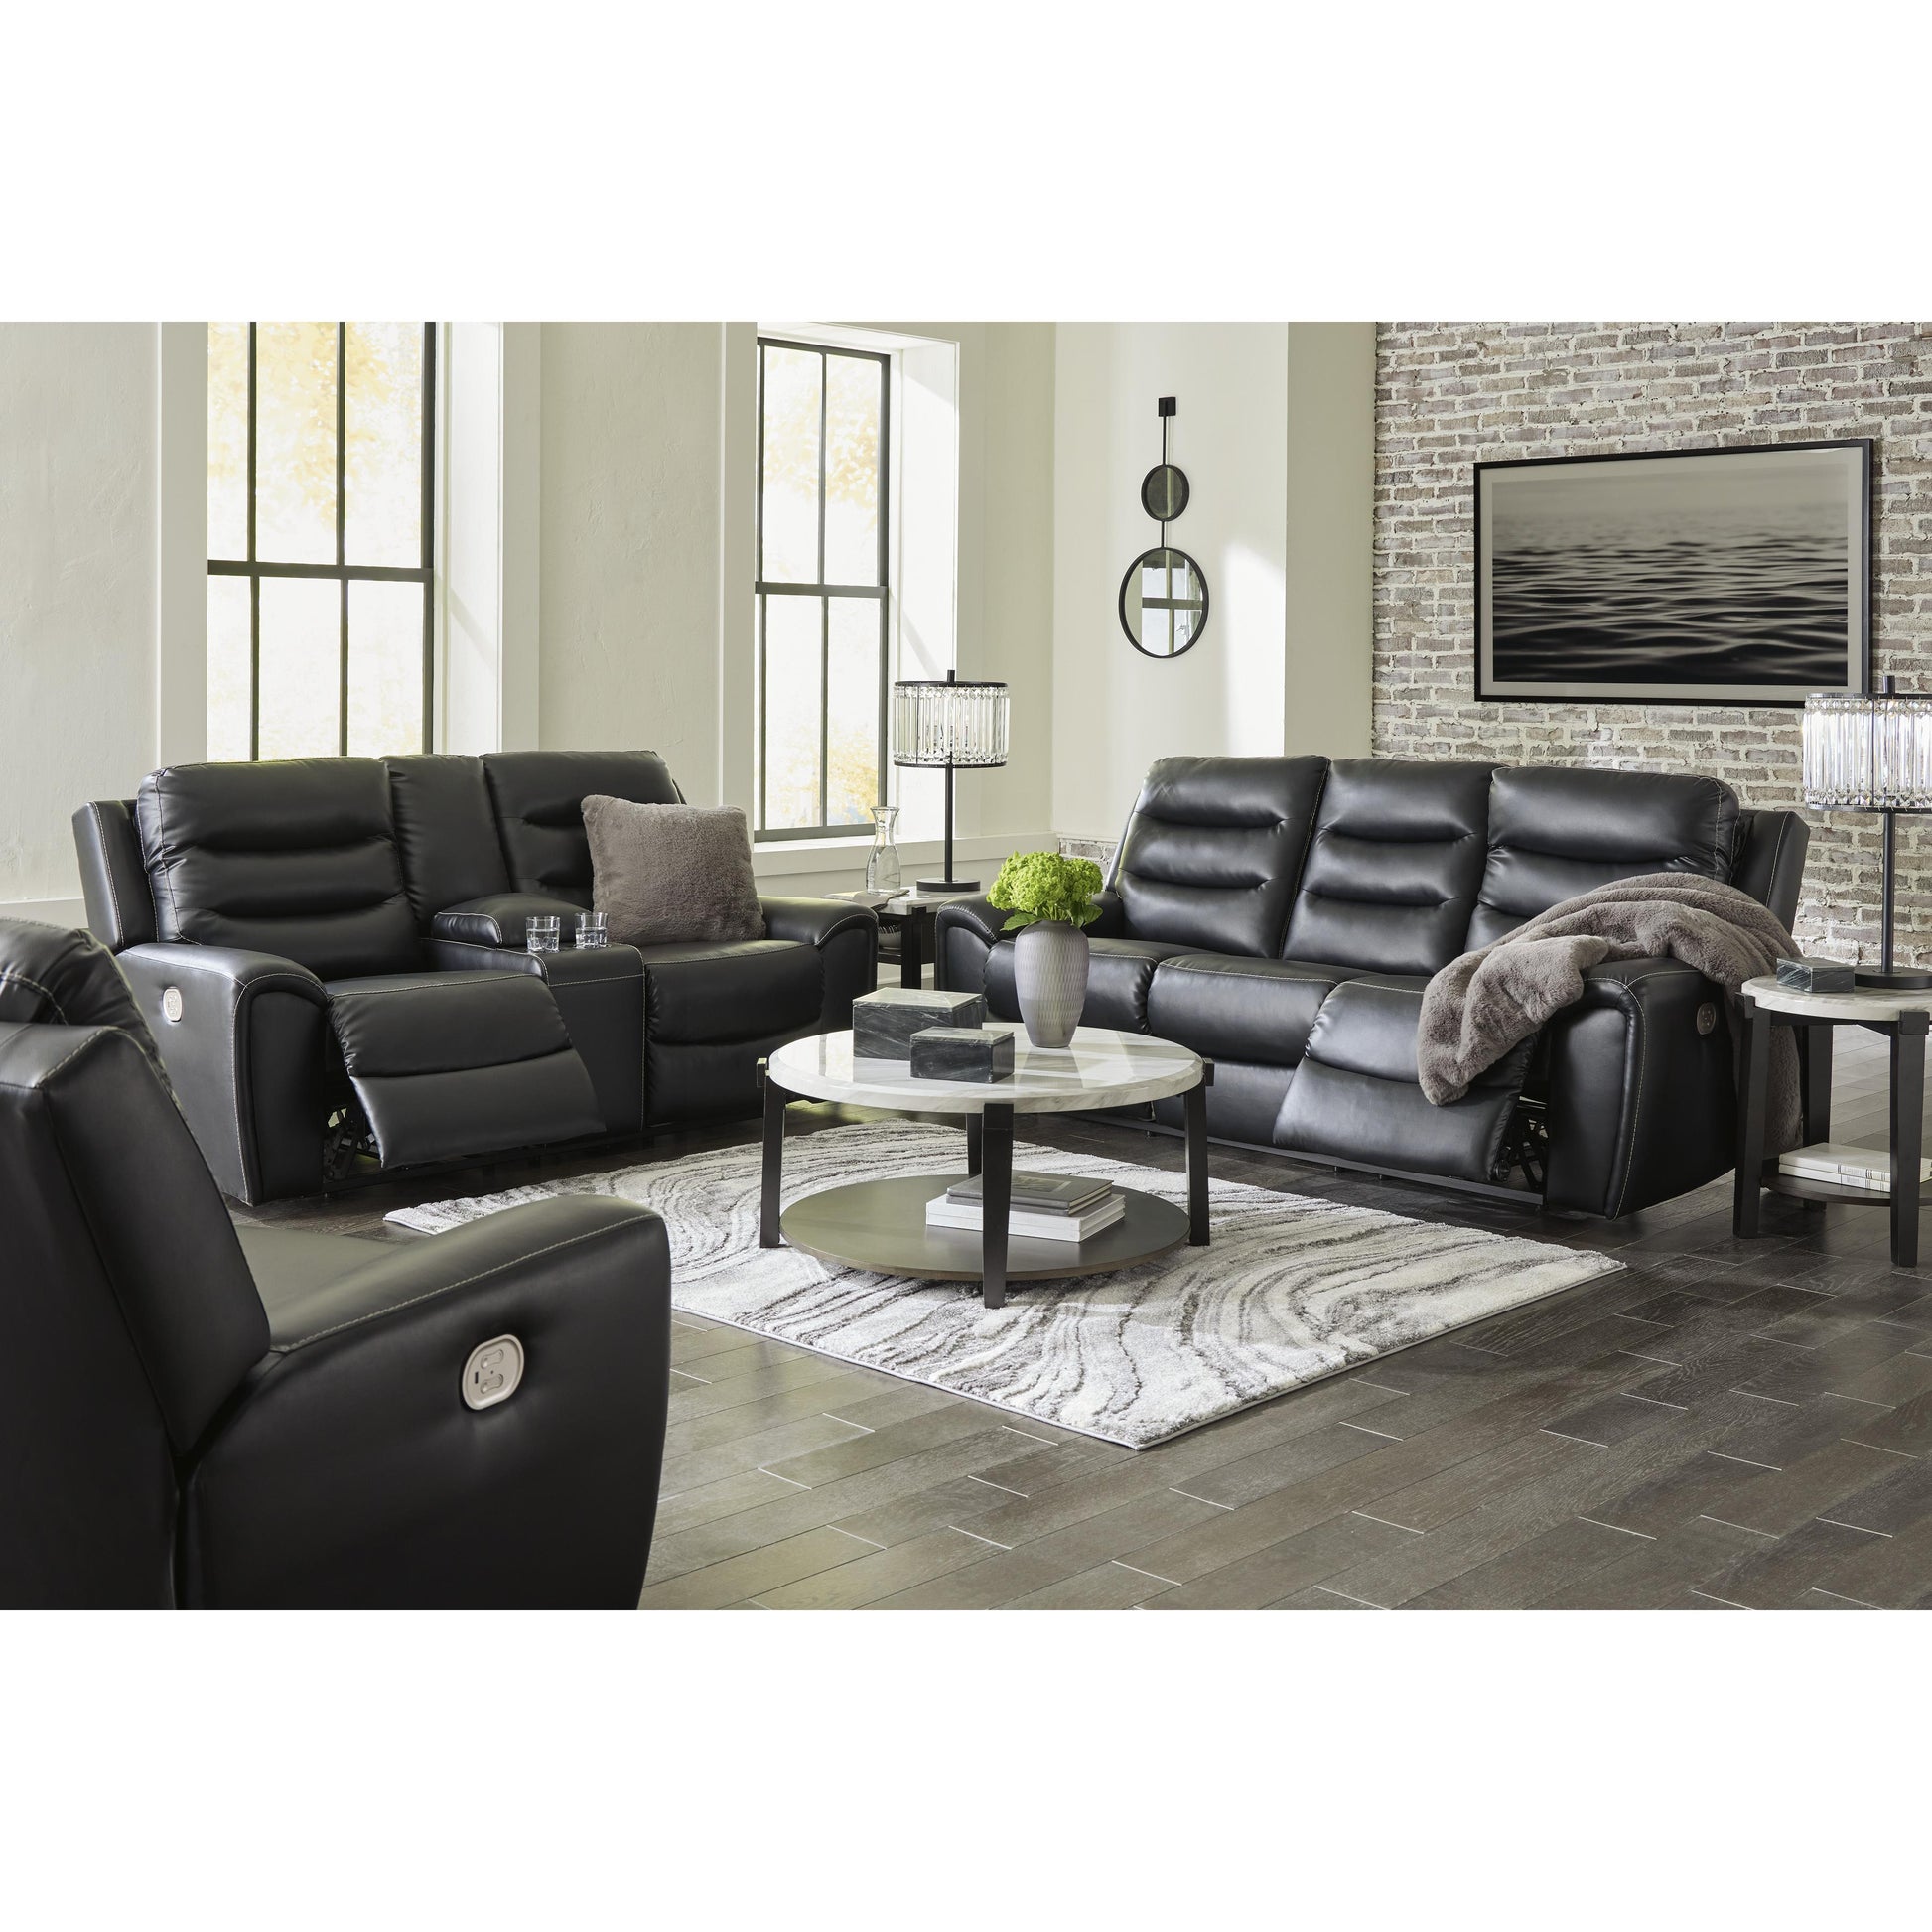 Signature Design by Ashley Warlin Power Reclining Leather Look Sofa 6110515 IMAGE 13